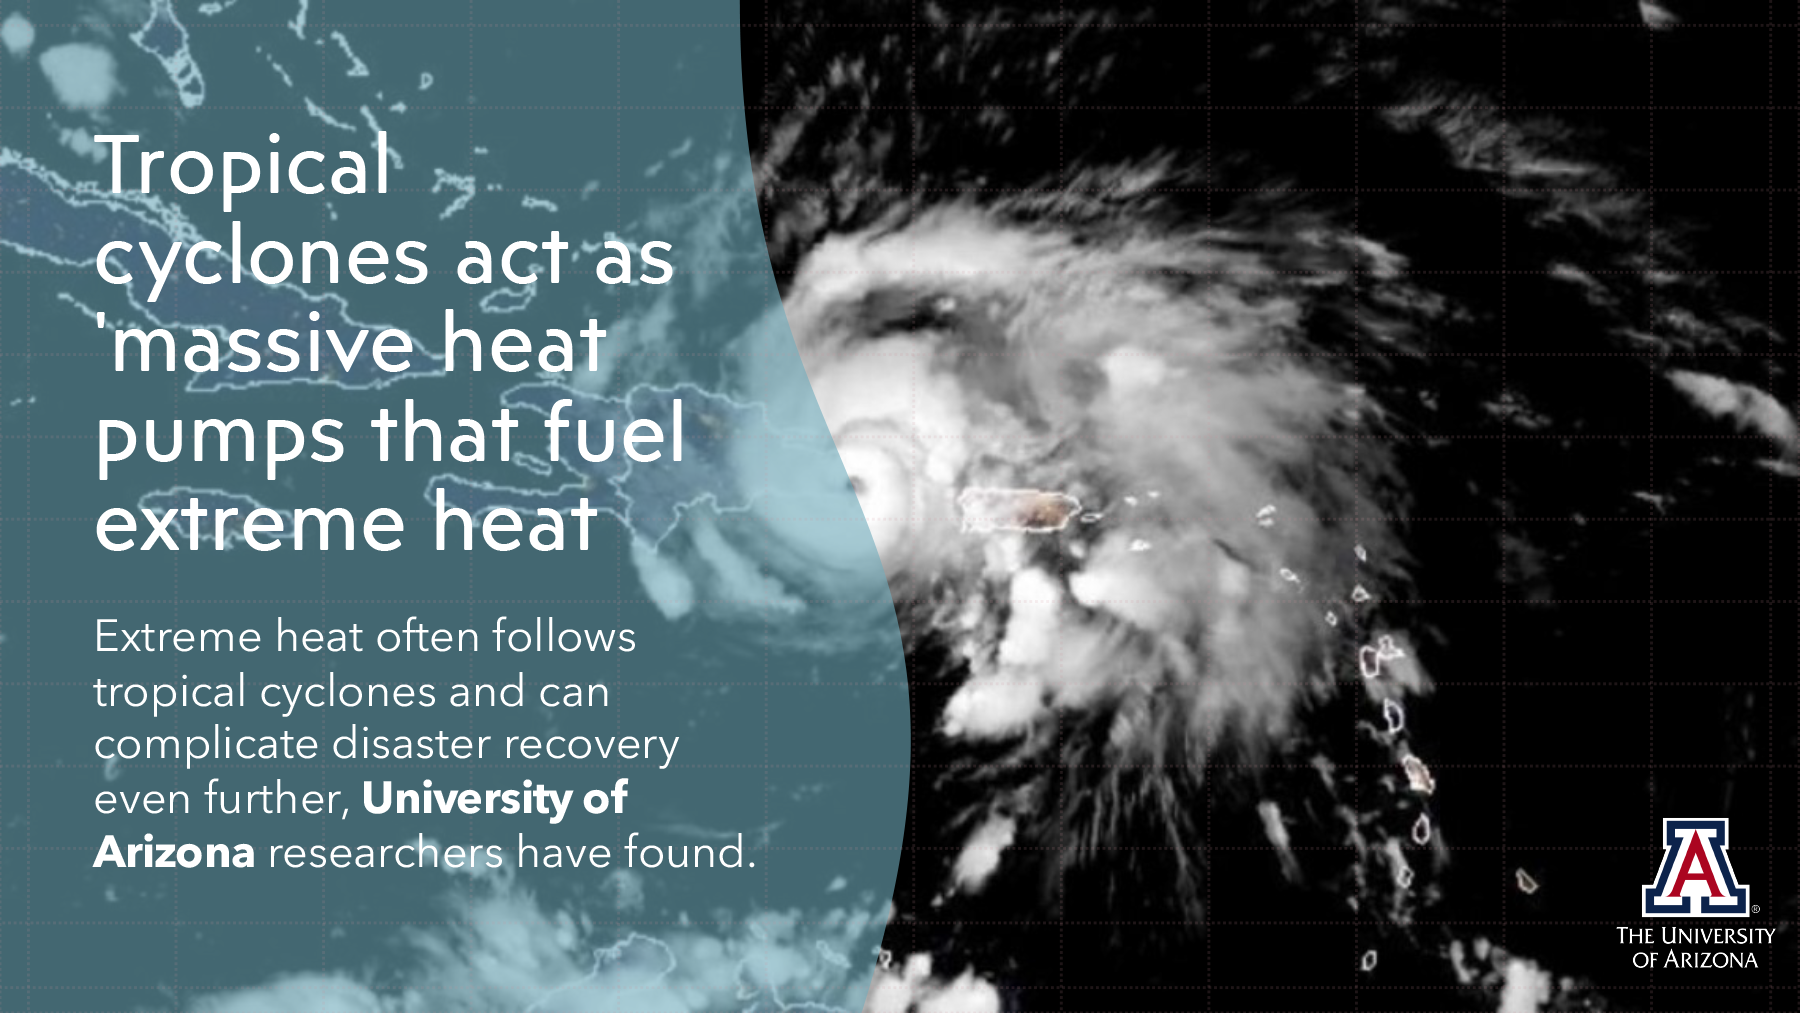 Tropical cyclones act as 'massive heat pumps that fuel extreme heat